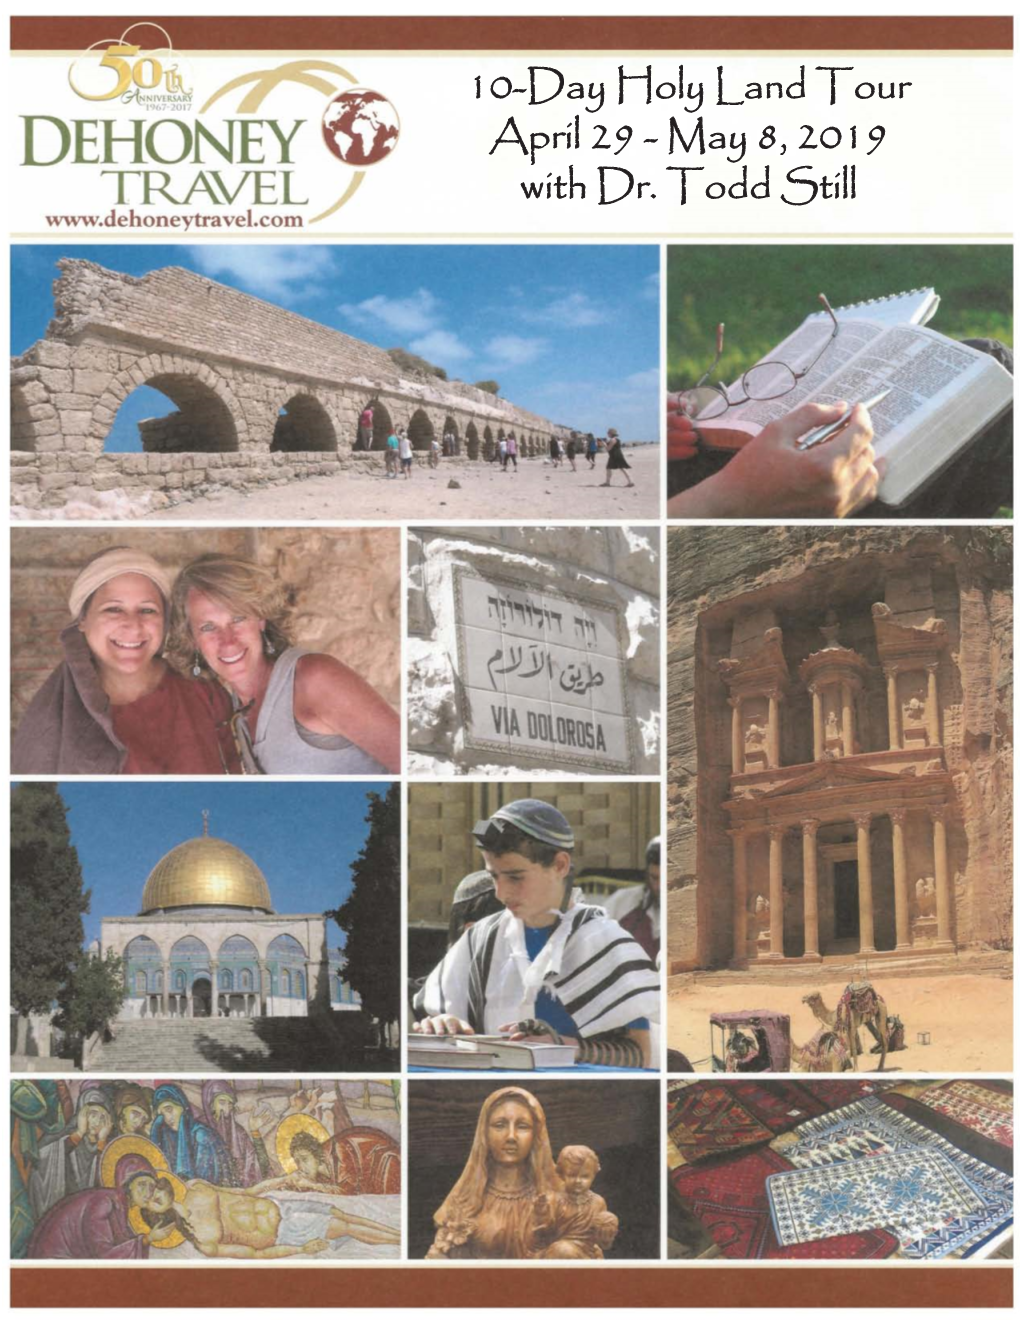 10-Day Holy Land Tour April 29 - May 8, 2019 with Dr